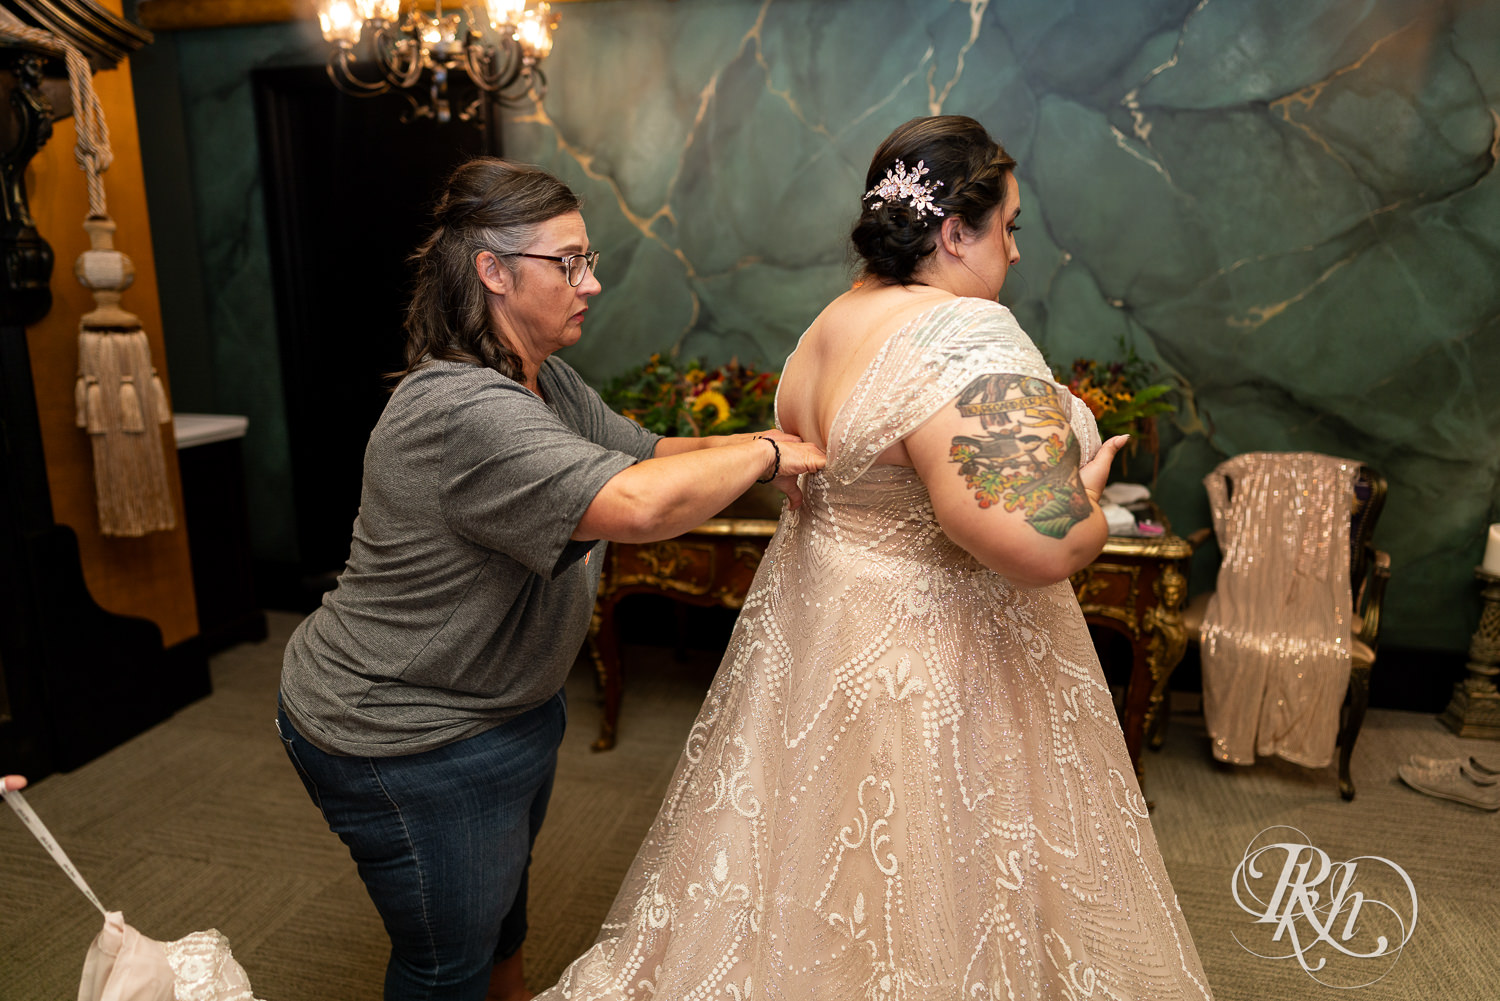 Plus size bride getting into dress at Kellerman's Event Center in White Bear Lake, Minnesota.